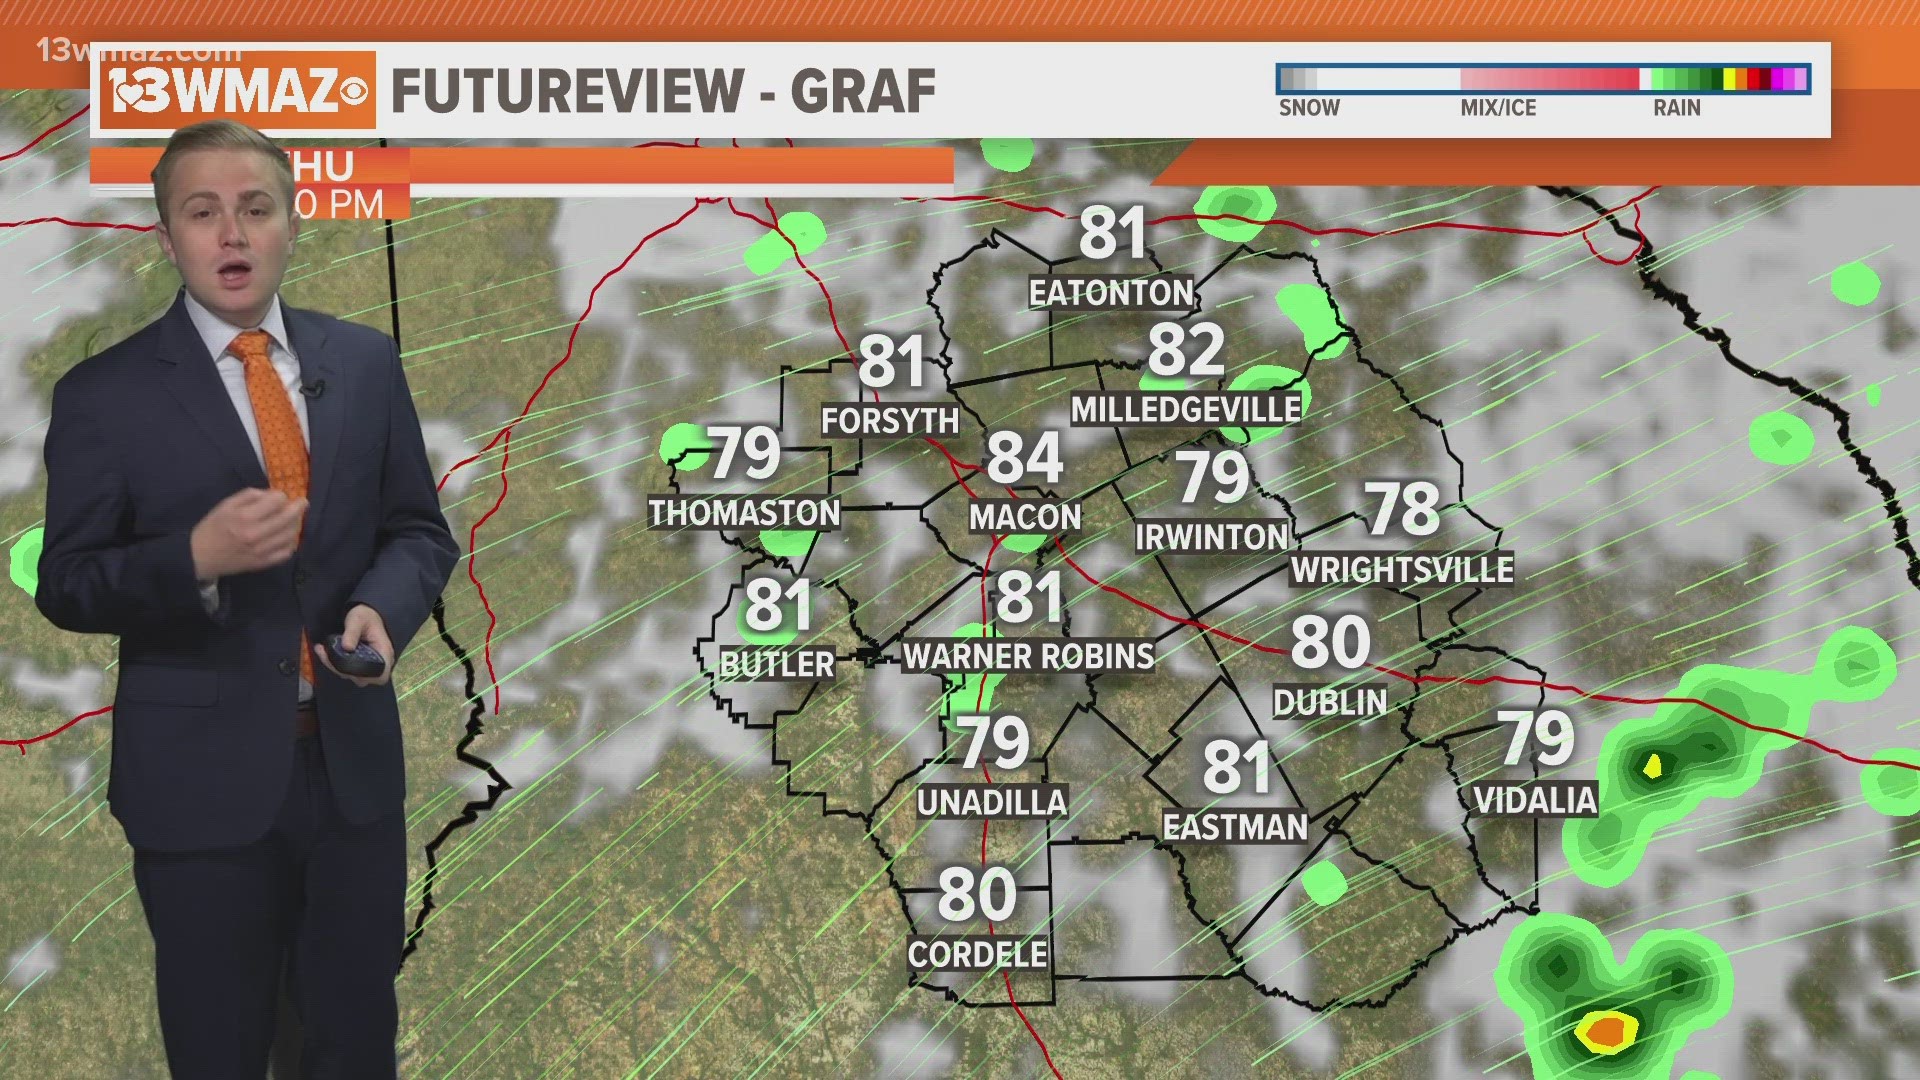 Mostly cloudy and passing showers through the afternoon hours.